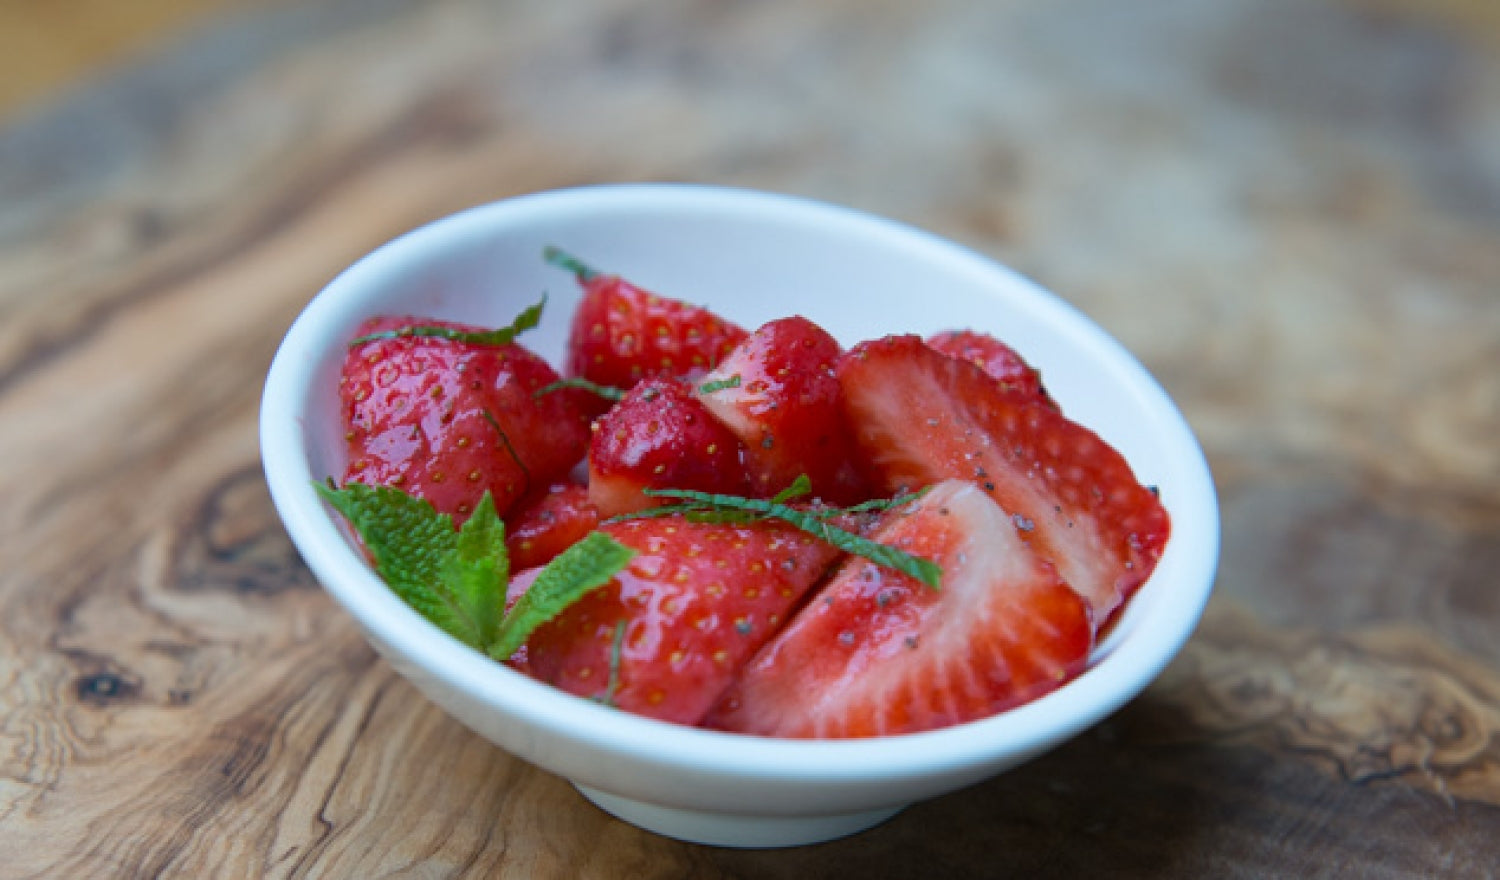 A Simple Strawberry Dessert In Minutes